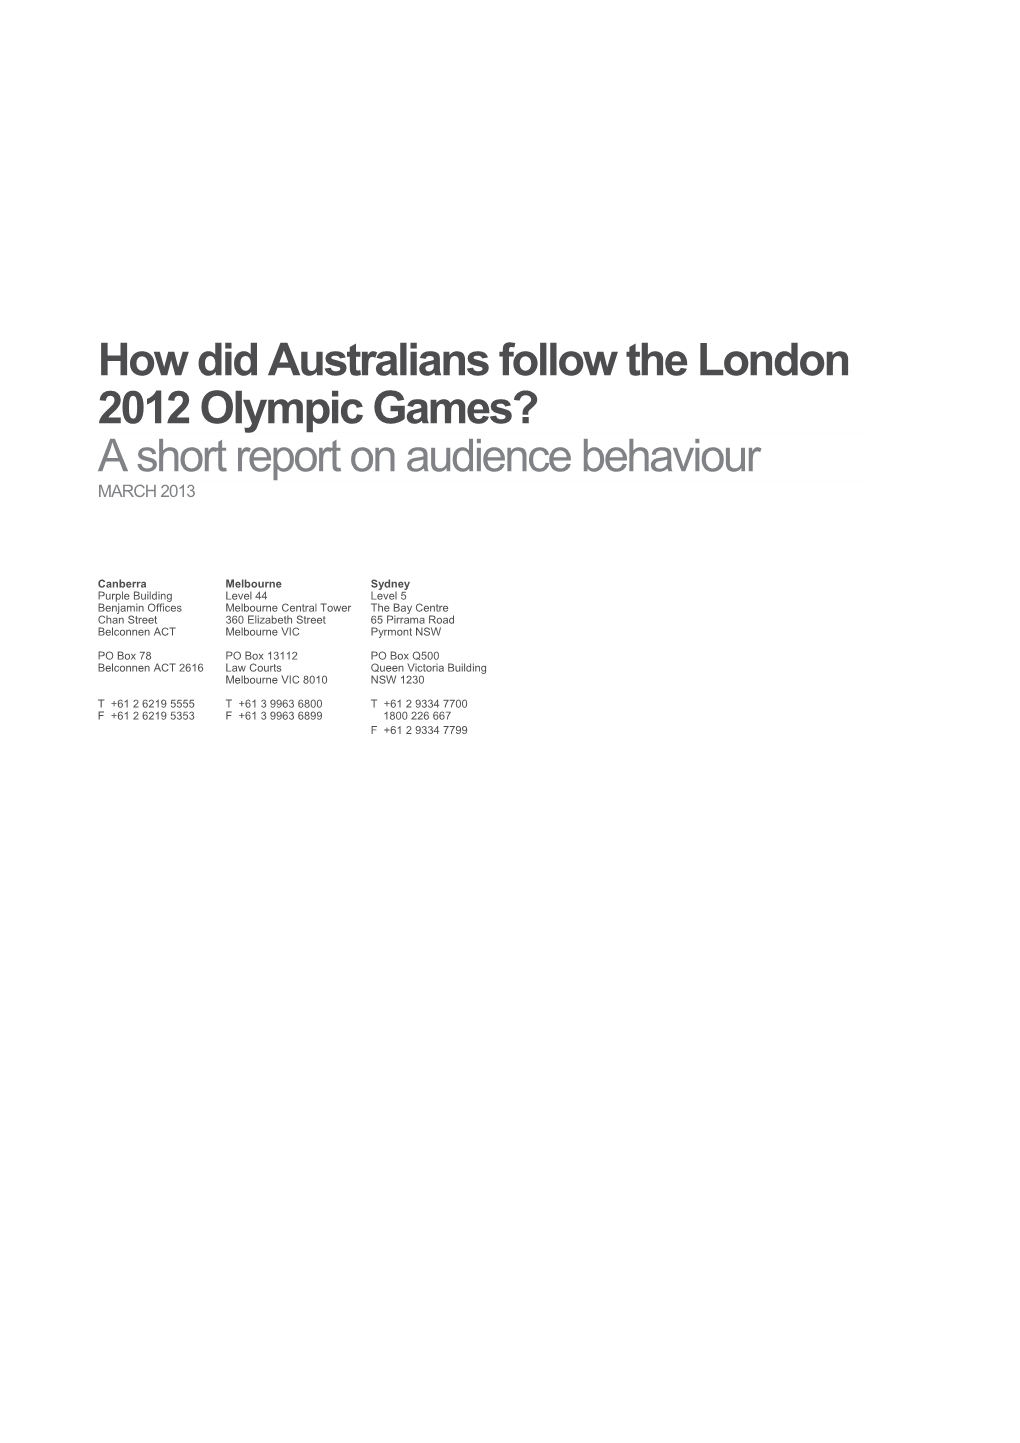 How Did Australians Follow the London 2012 Olympic Games?